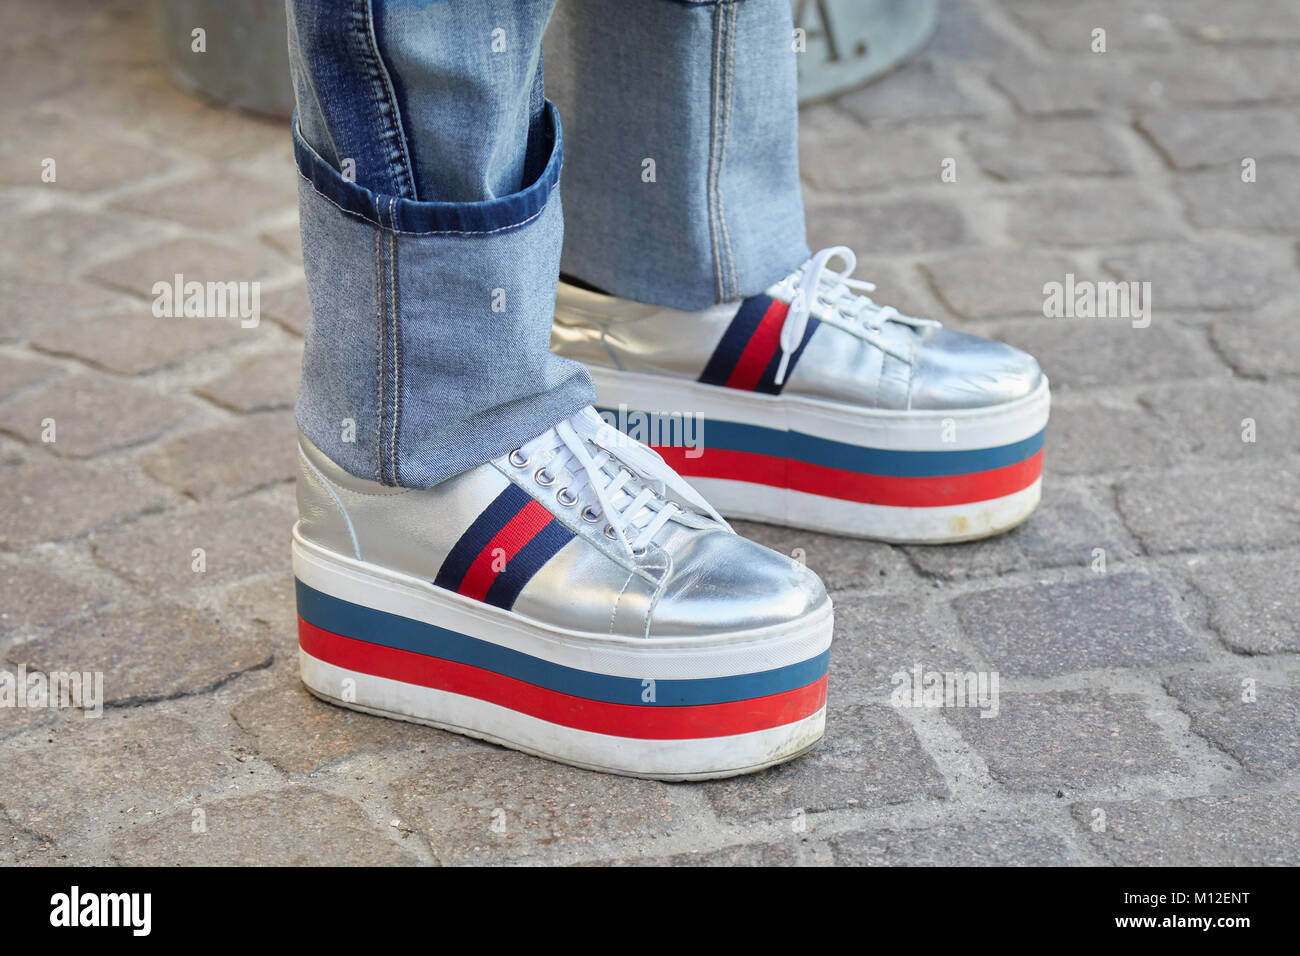 MILAN - JANUARY 14: Man with wedge heel silver sneakers in red, blue and white colors before Daks fashion show, Milan Fashion Week street style on Jan Stock Photo